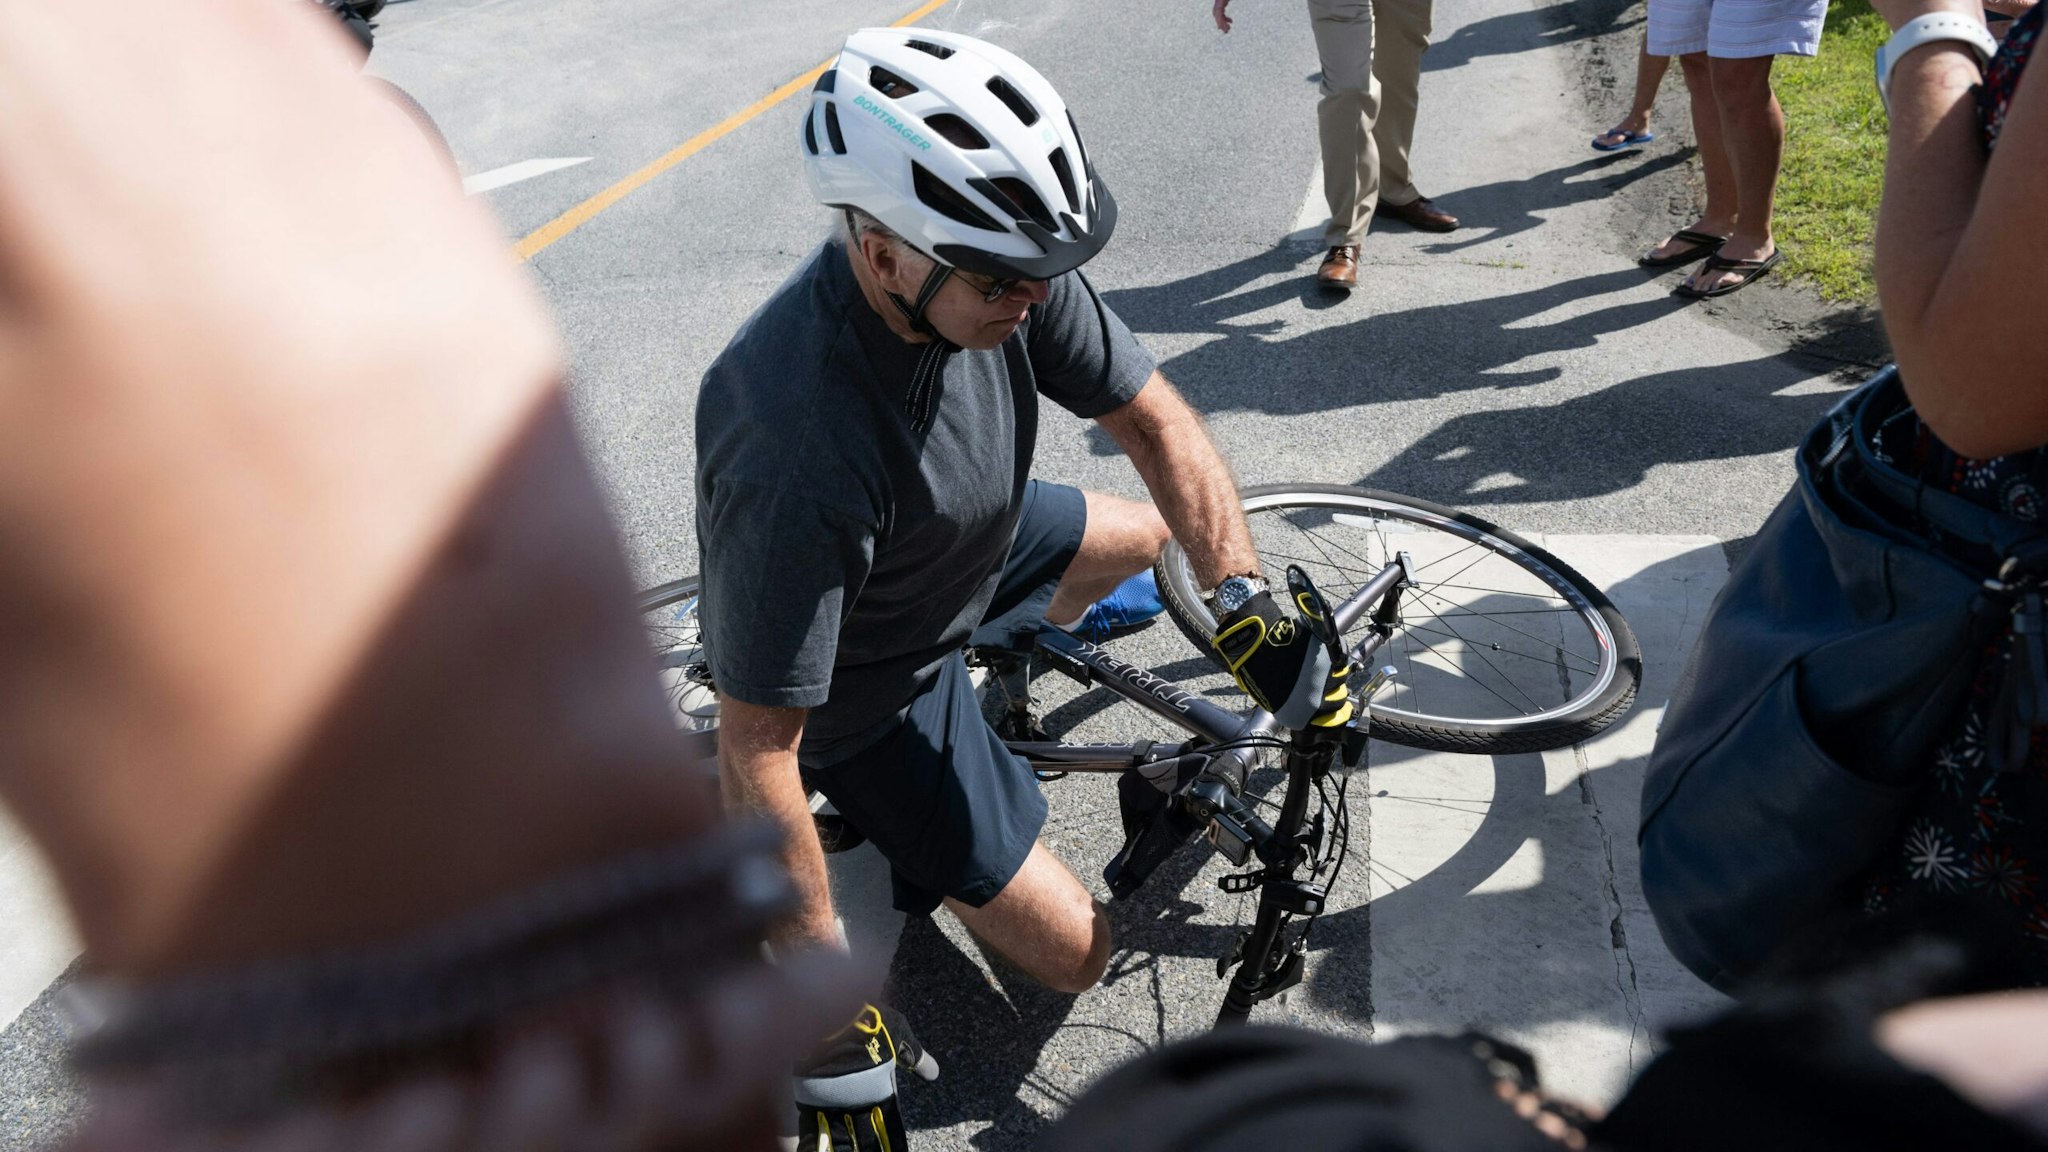 President Joe Biden falls off his bicycle as he approaches well-wishers following a bike ride at Gordon's Pond State Park in Rehoboth Beach, Delaware, on June 18, 2022.